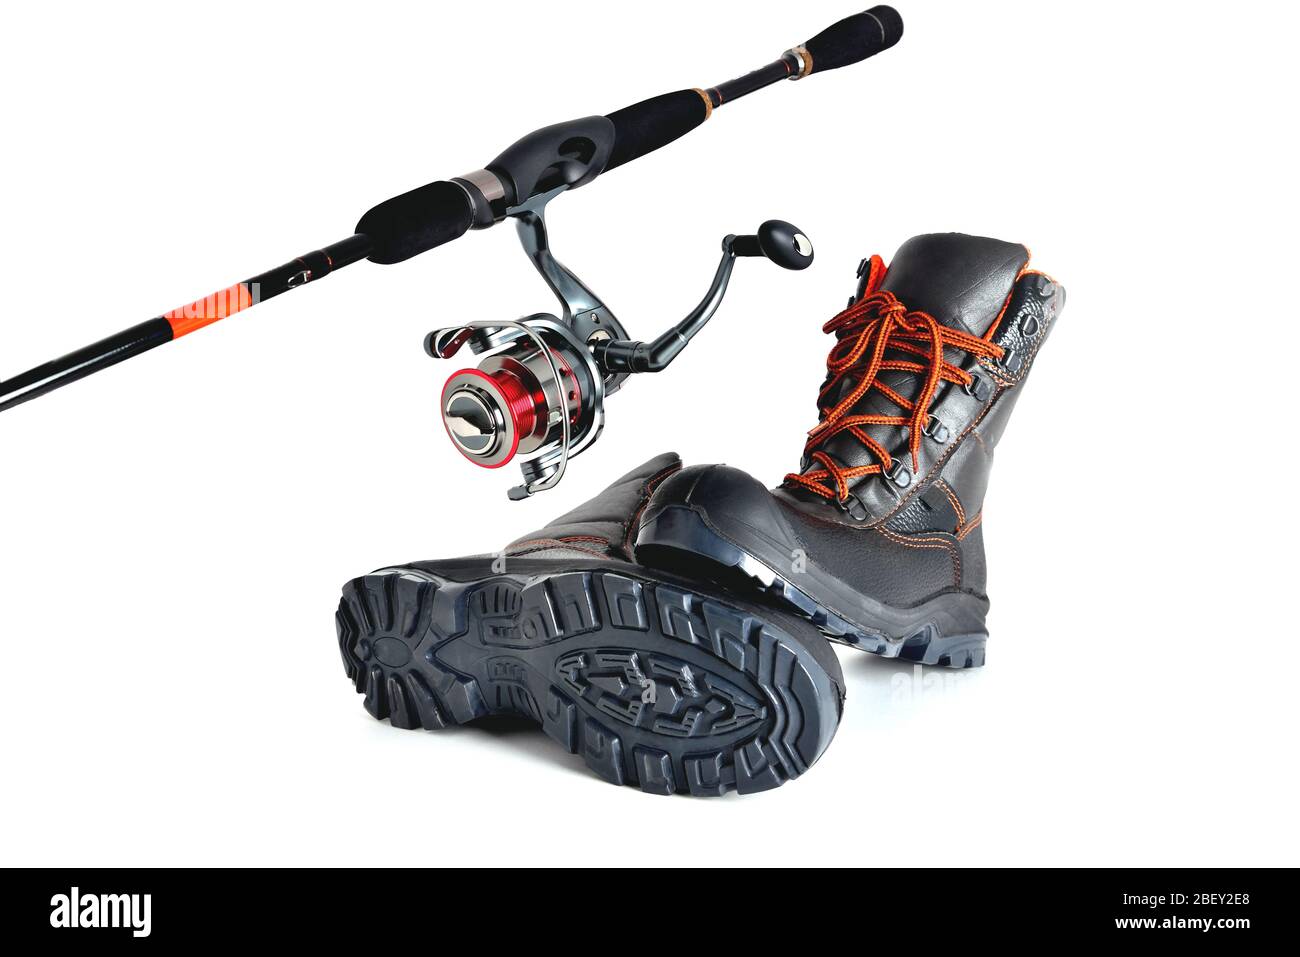 Spinning with a reel and off-road shoes with orange laces on a white background, isolate Stock Photo